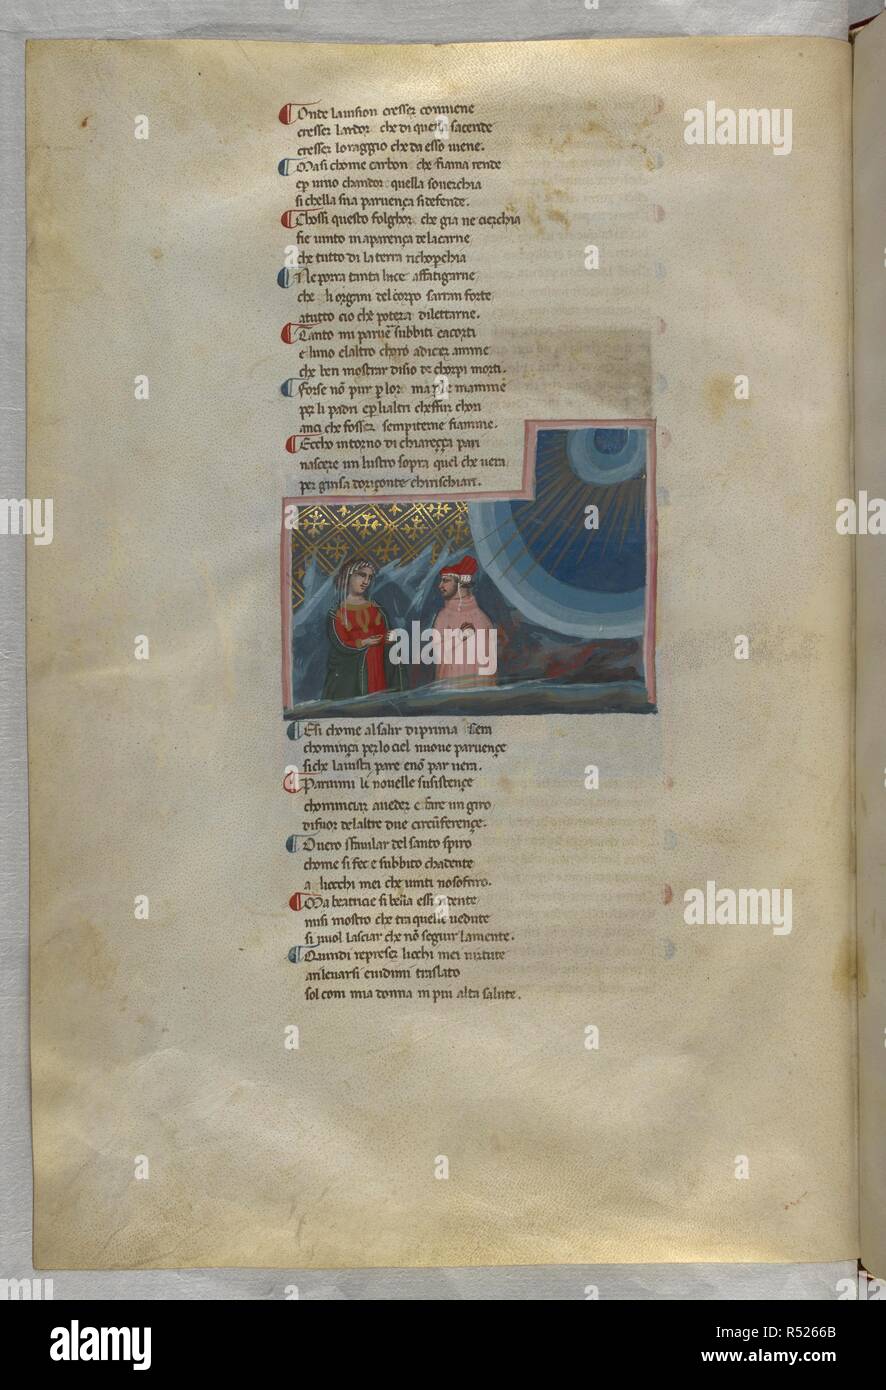 Paradiso : Dante turns to Beatrice. Dante Alighieri, Divina Commedia ( The Divine Comedy ), with a commentary in Latin. 1st half of the 14th century. Source: Egerton 943, f.151v. Language: Italian, Latin. Stock Photo